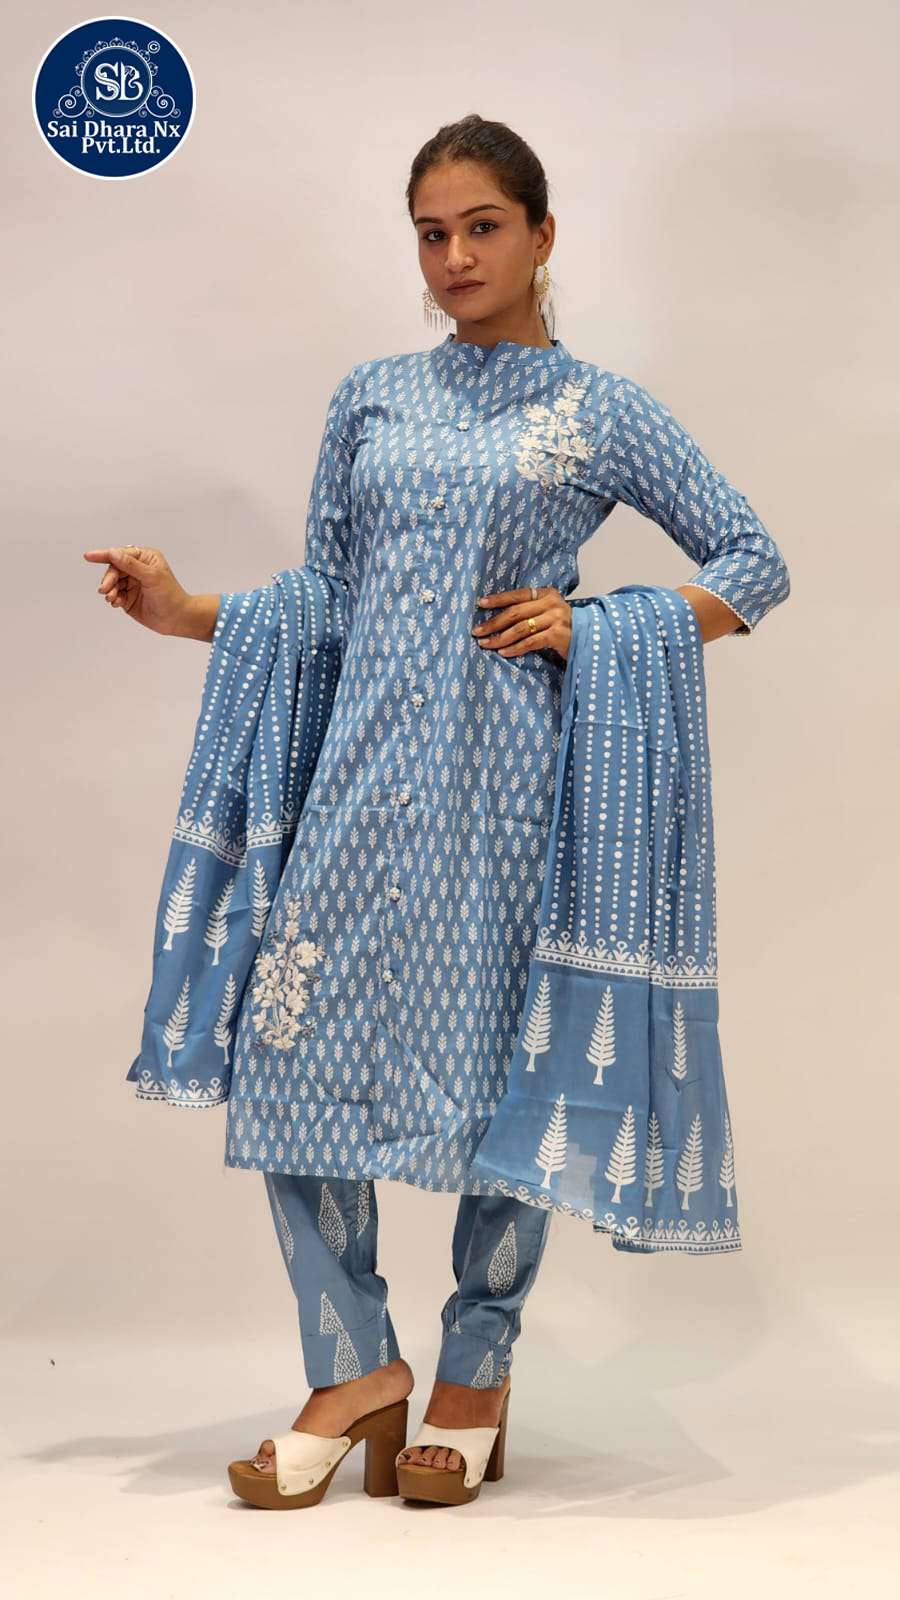 SAIDHARANX PRESENTS PURE COTTON HIGH NECK BLUE EMBROIDERY WORK 3 PIECE COMBO COLLECTION WHOLESALE SHOP IN SURAT - SaiDharaNx